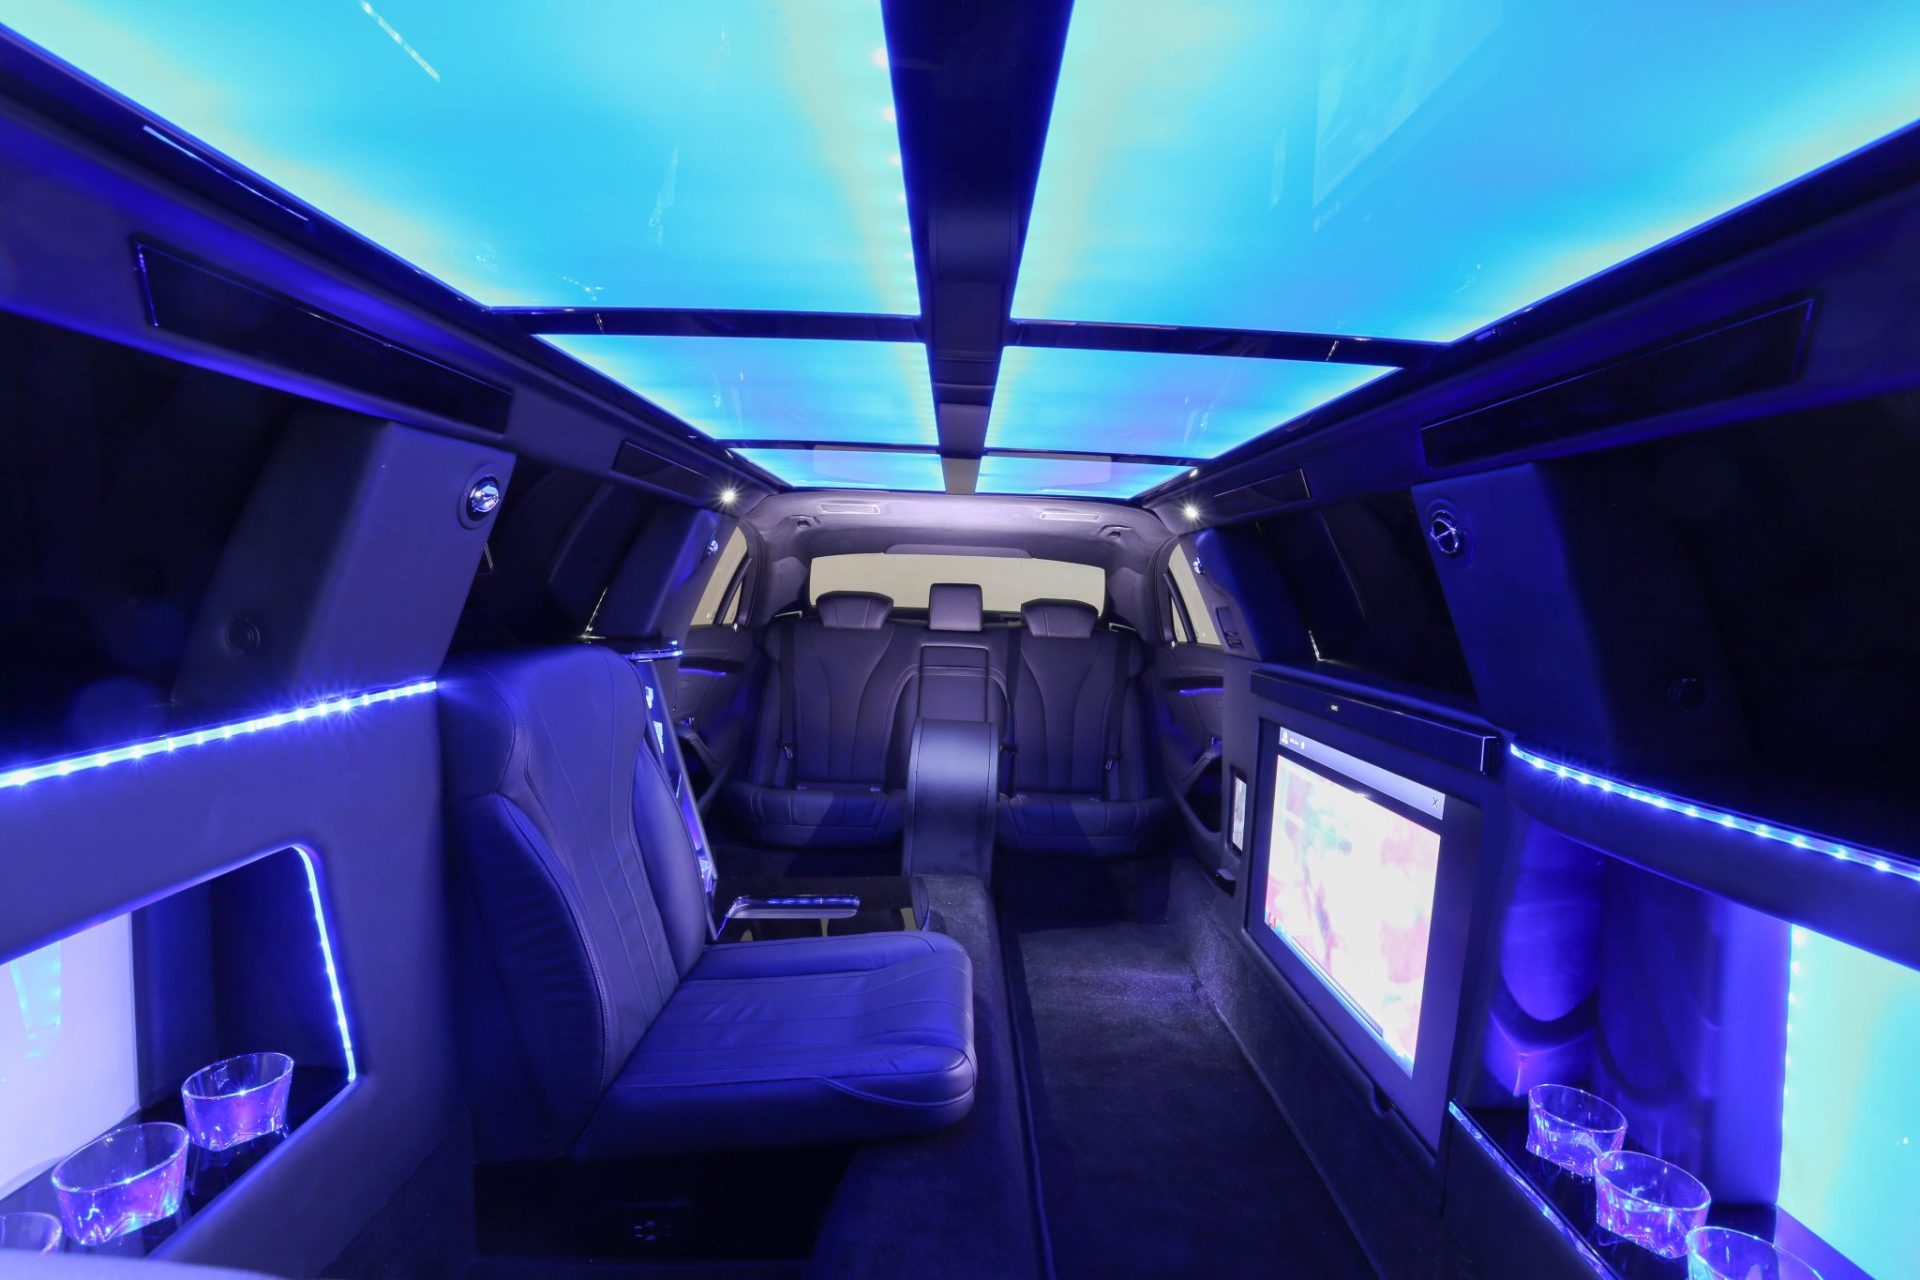 Mercedes Benz S-Class Stretched Limousine - Interior Photo #37